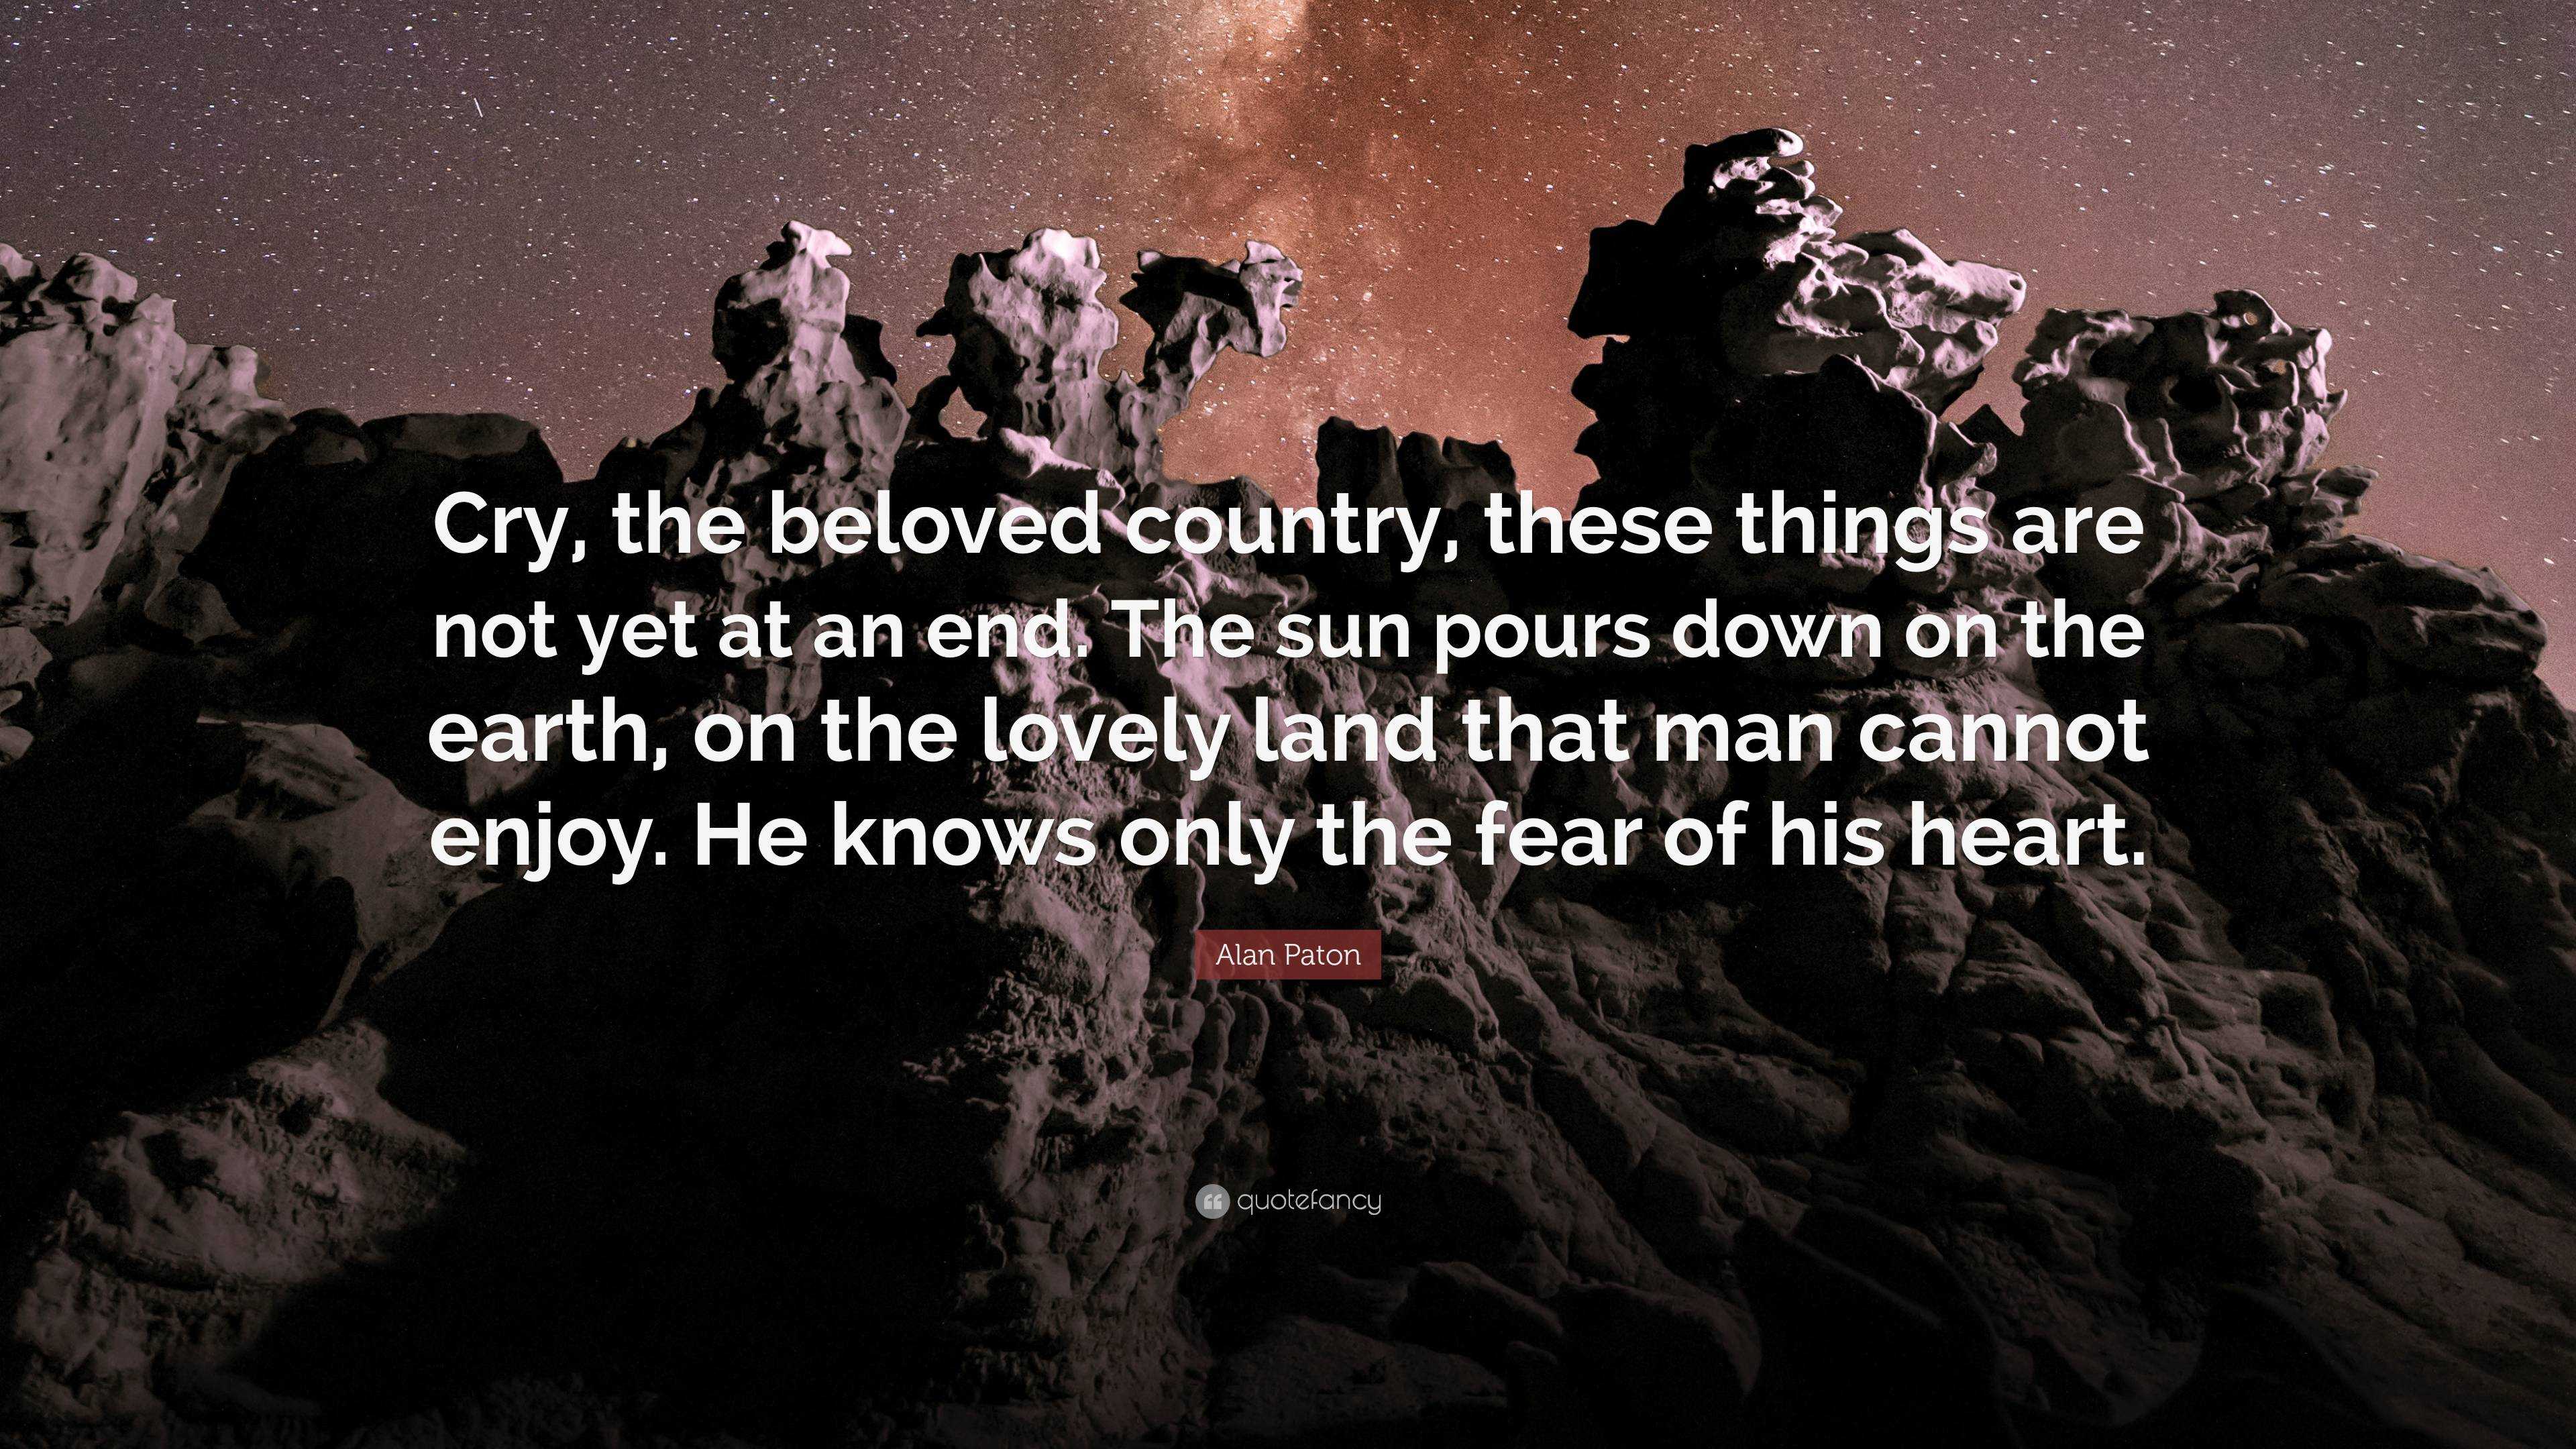 Alan Paton Quote: “Cry, The Beloved Country, These Things Are Not Yet At An End. The Sun Pours Down On The Earth, On The Lovely Land That M...”